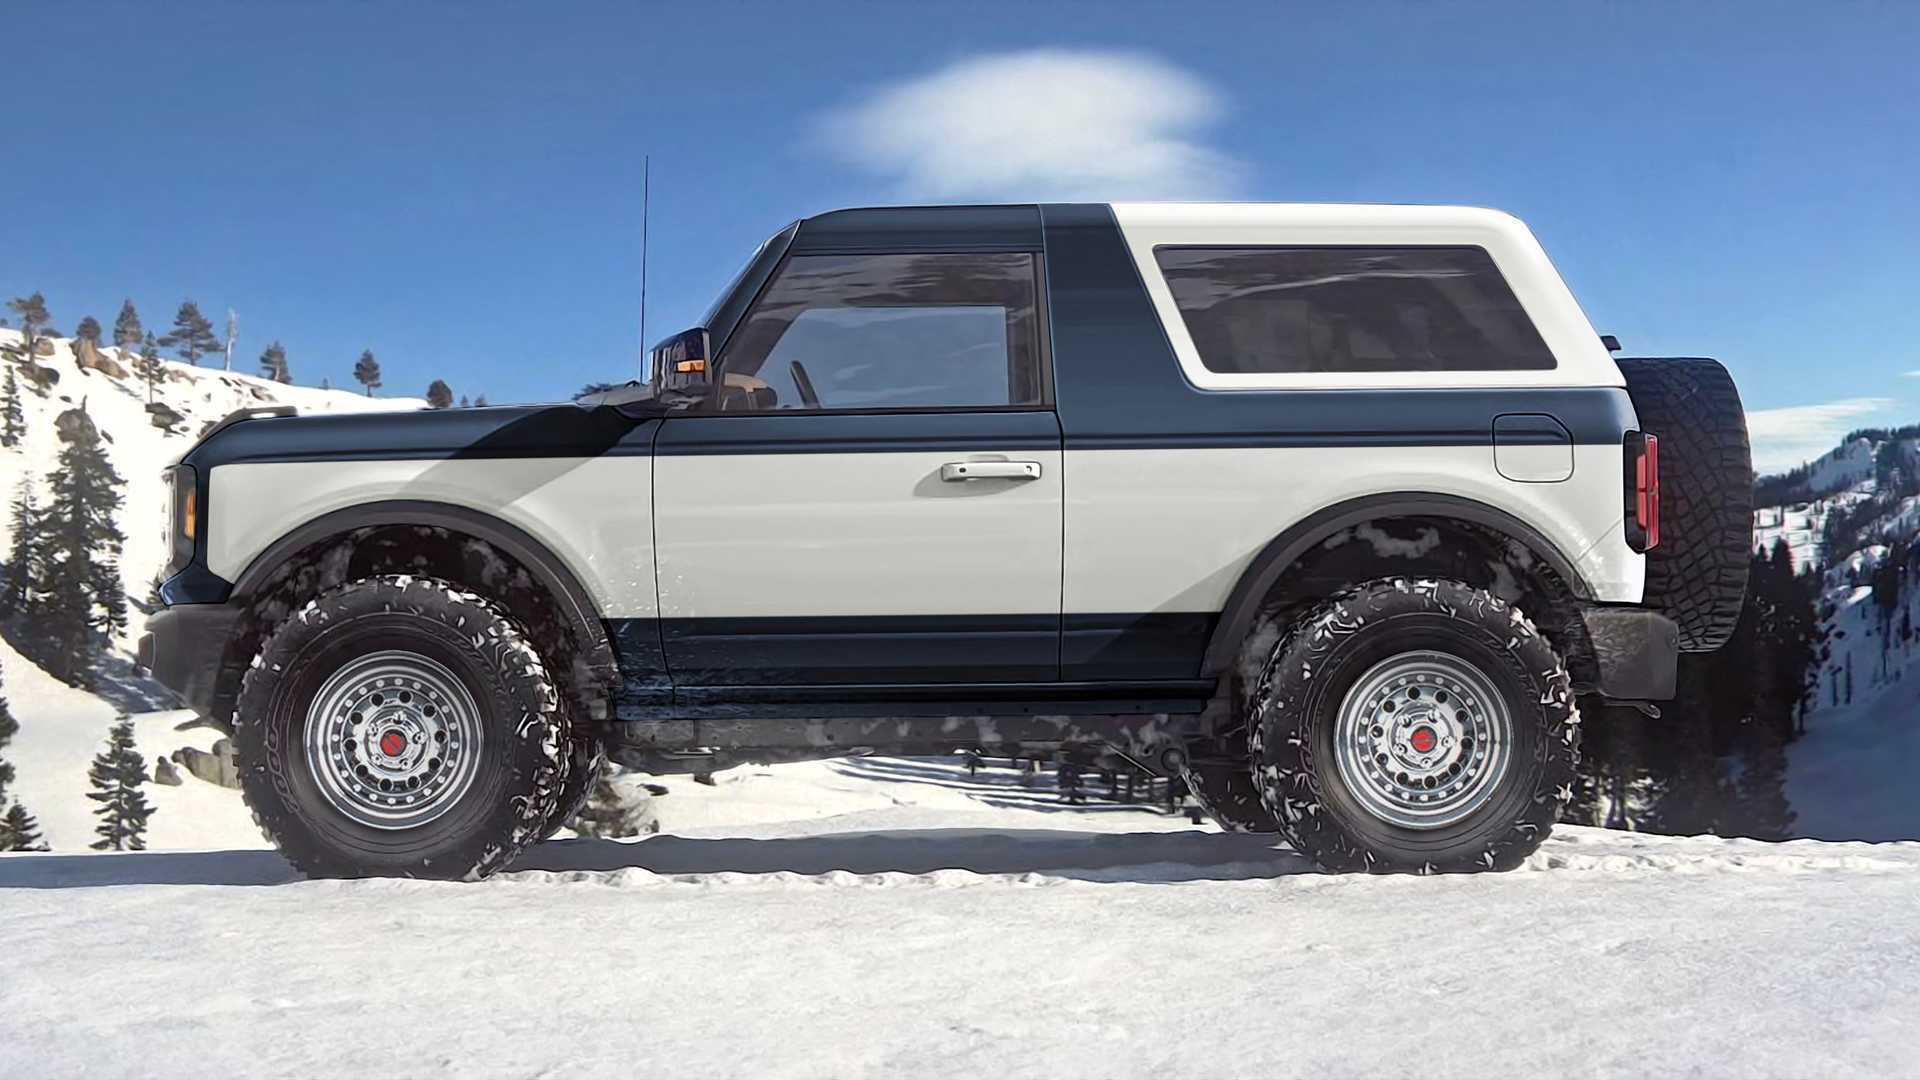 Ford Bronco Put any cool / unique vinyl decals on your Bronco?  Let's see them! 20230217_075827